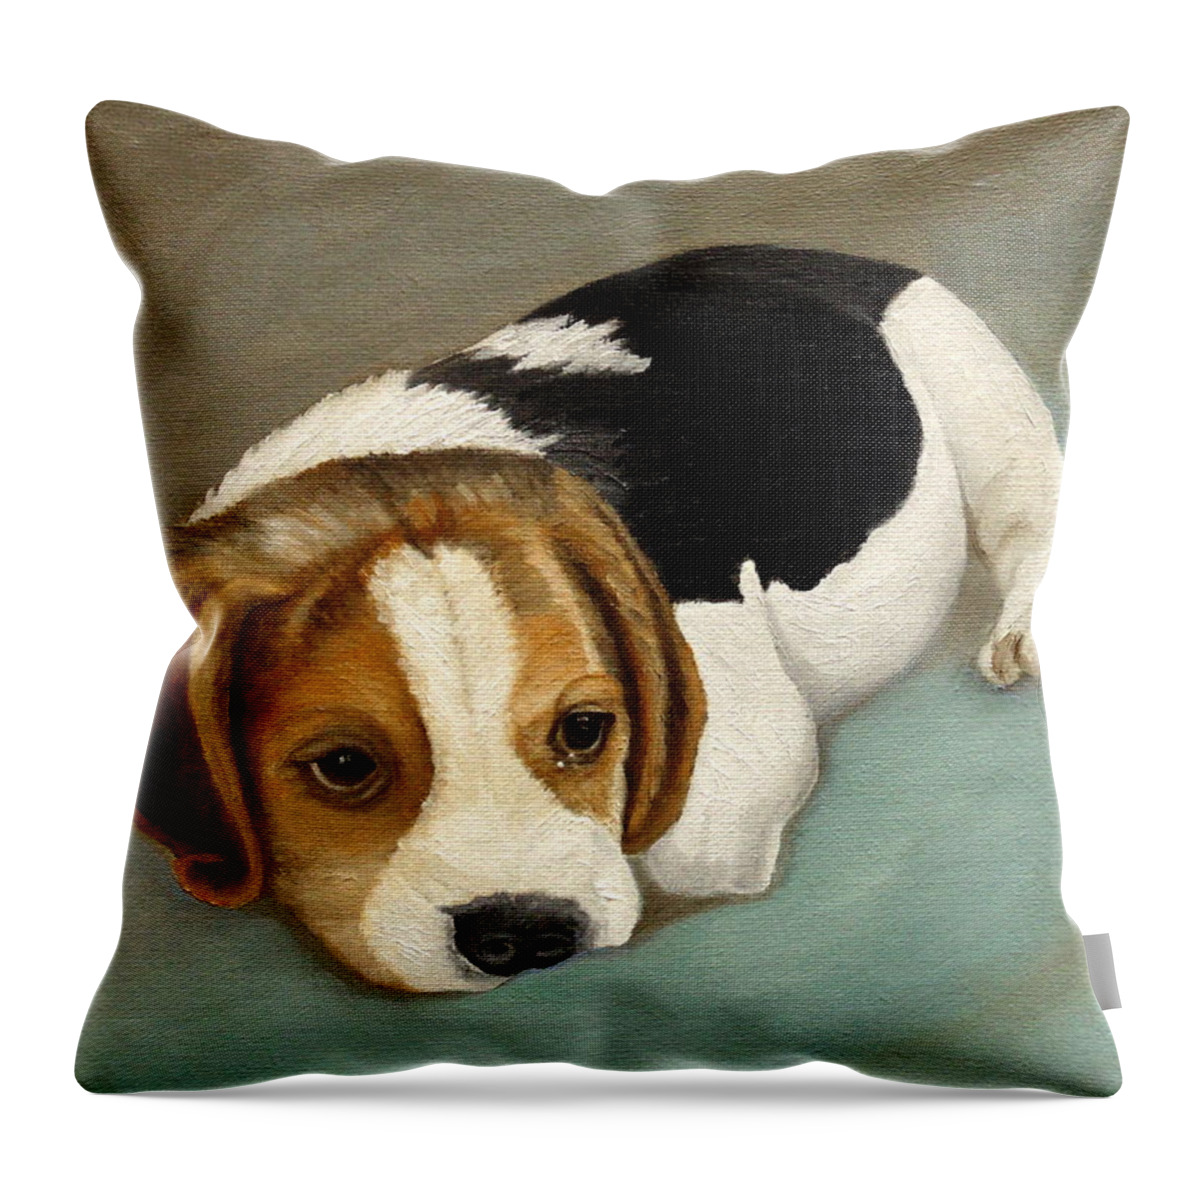 Beagle Throw Pillow featuring the painting Cute Beagle by Angeles M Pomata